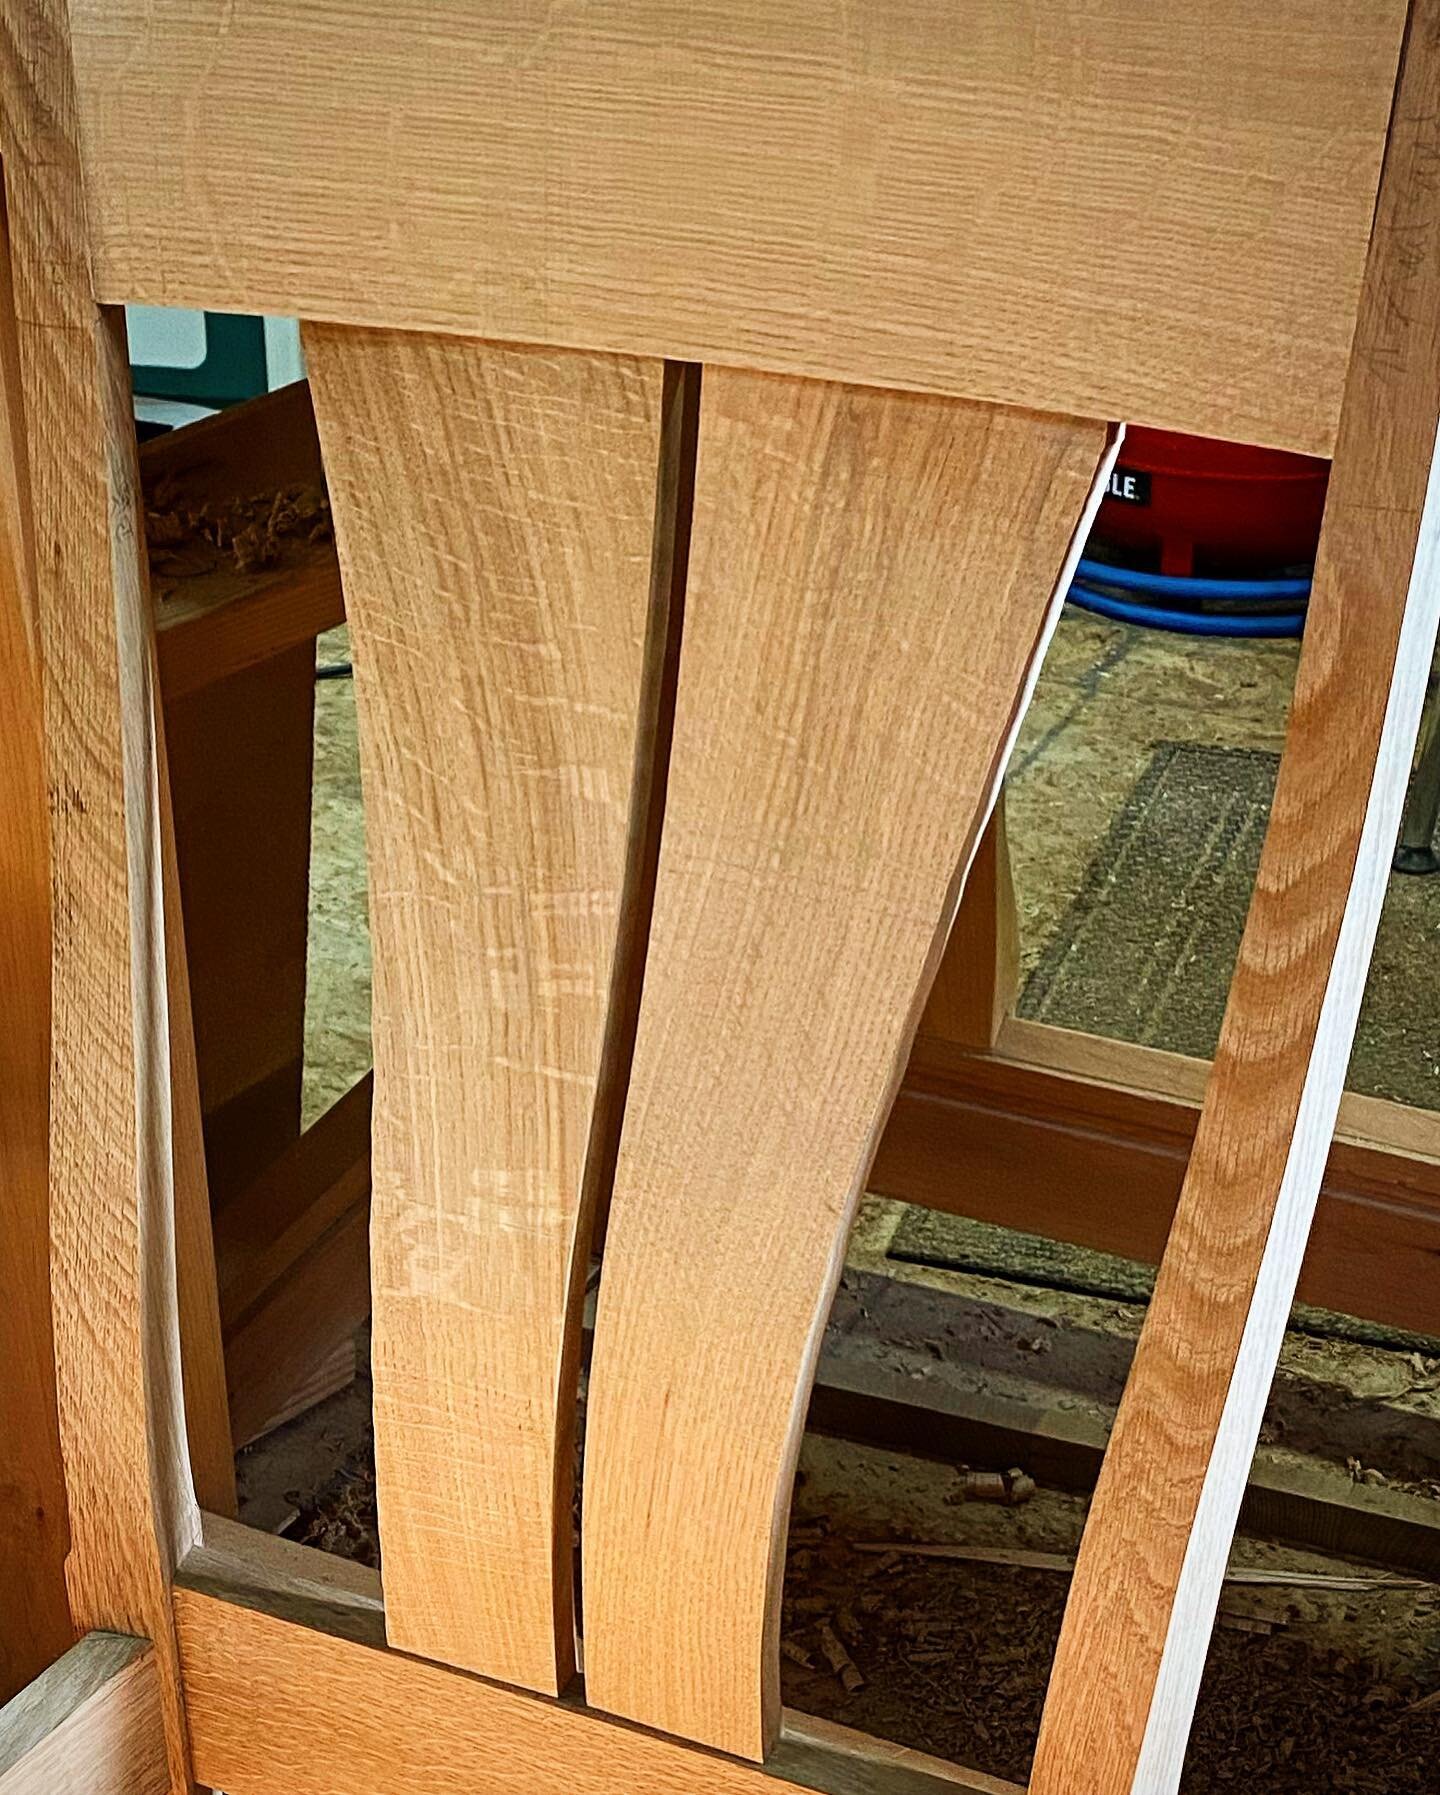 The reason why you don&rsquo;t buy mass produced furniture. You miss out on small details like this grain that flows with the curve of the chair back rest.